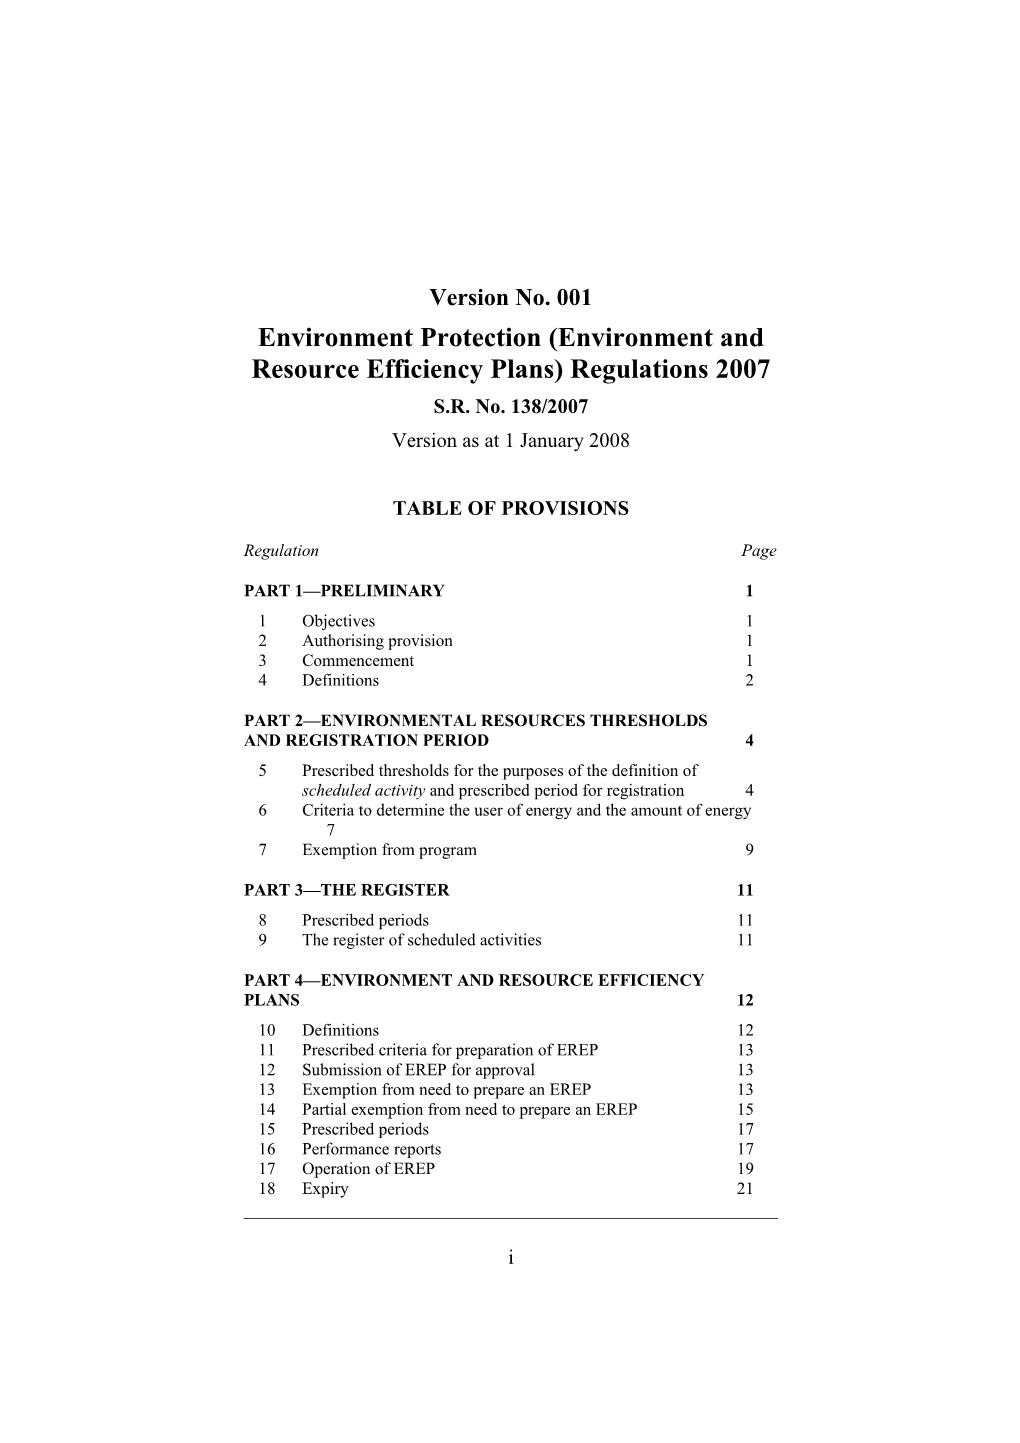 Environment Protection (Environment and Resource Efficiency Plans) Regulations 2007